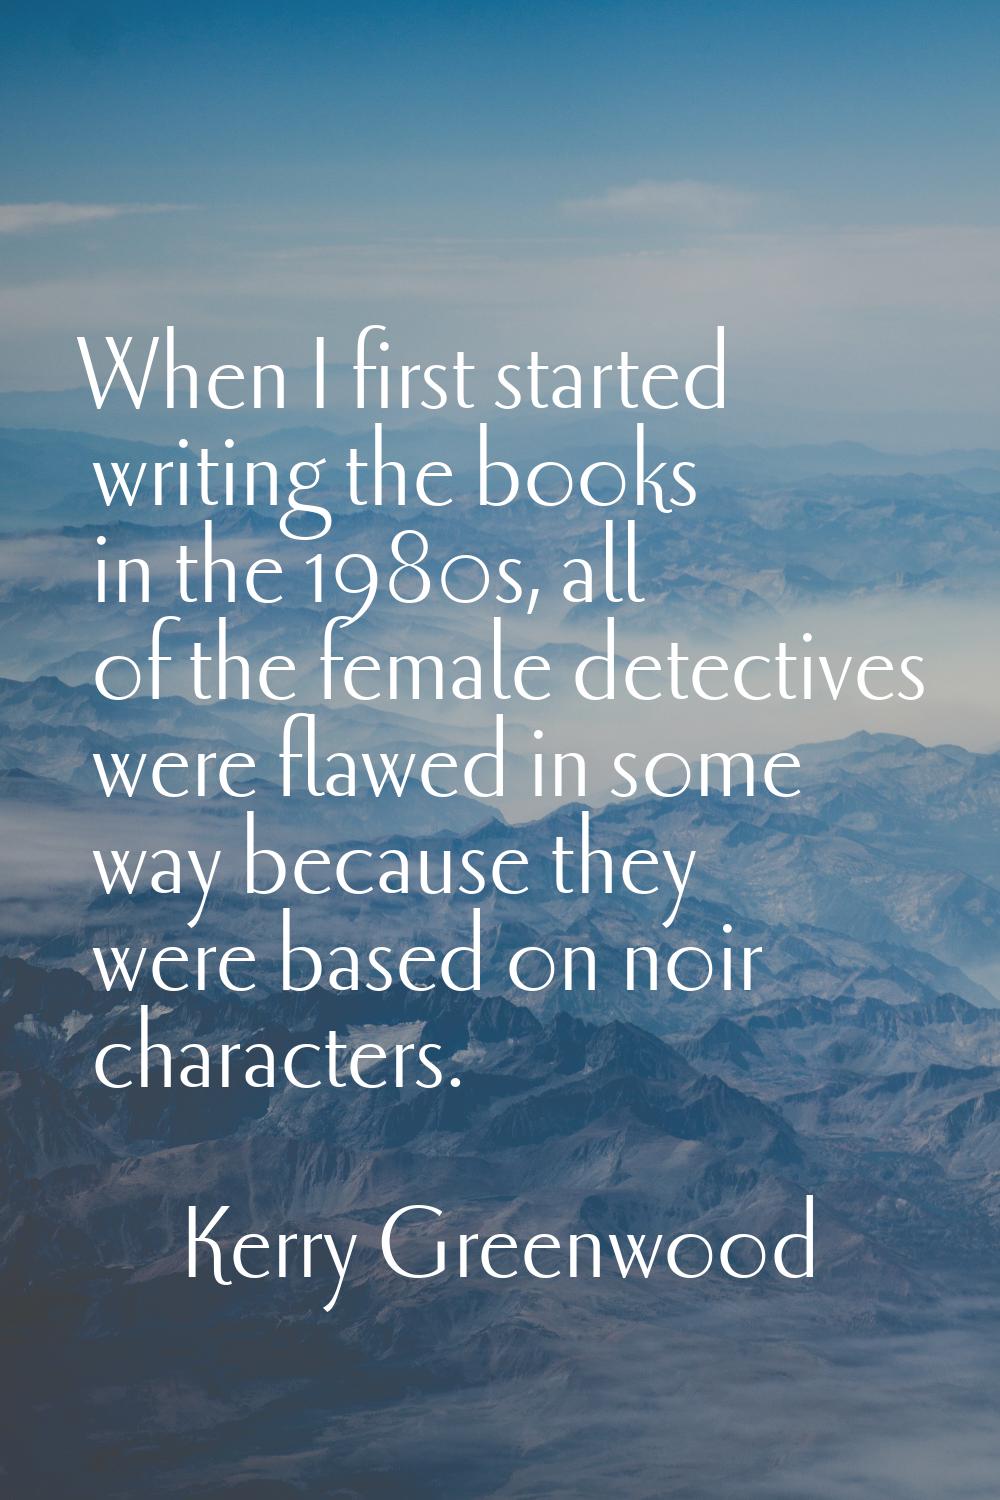 When I first started writing the books in the 1980s, all of the female detectives were flawed in so